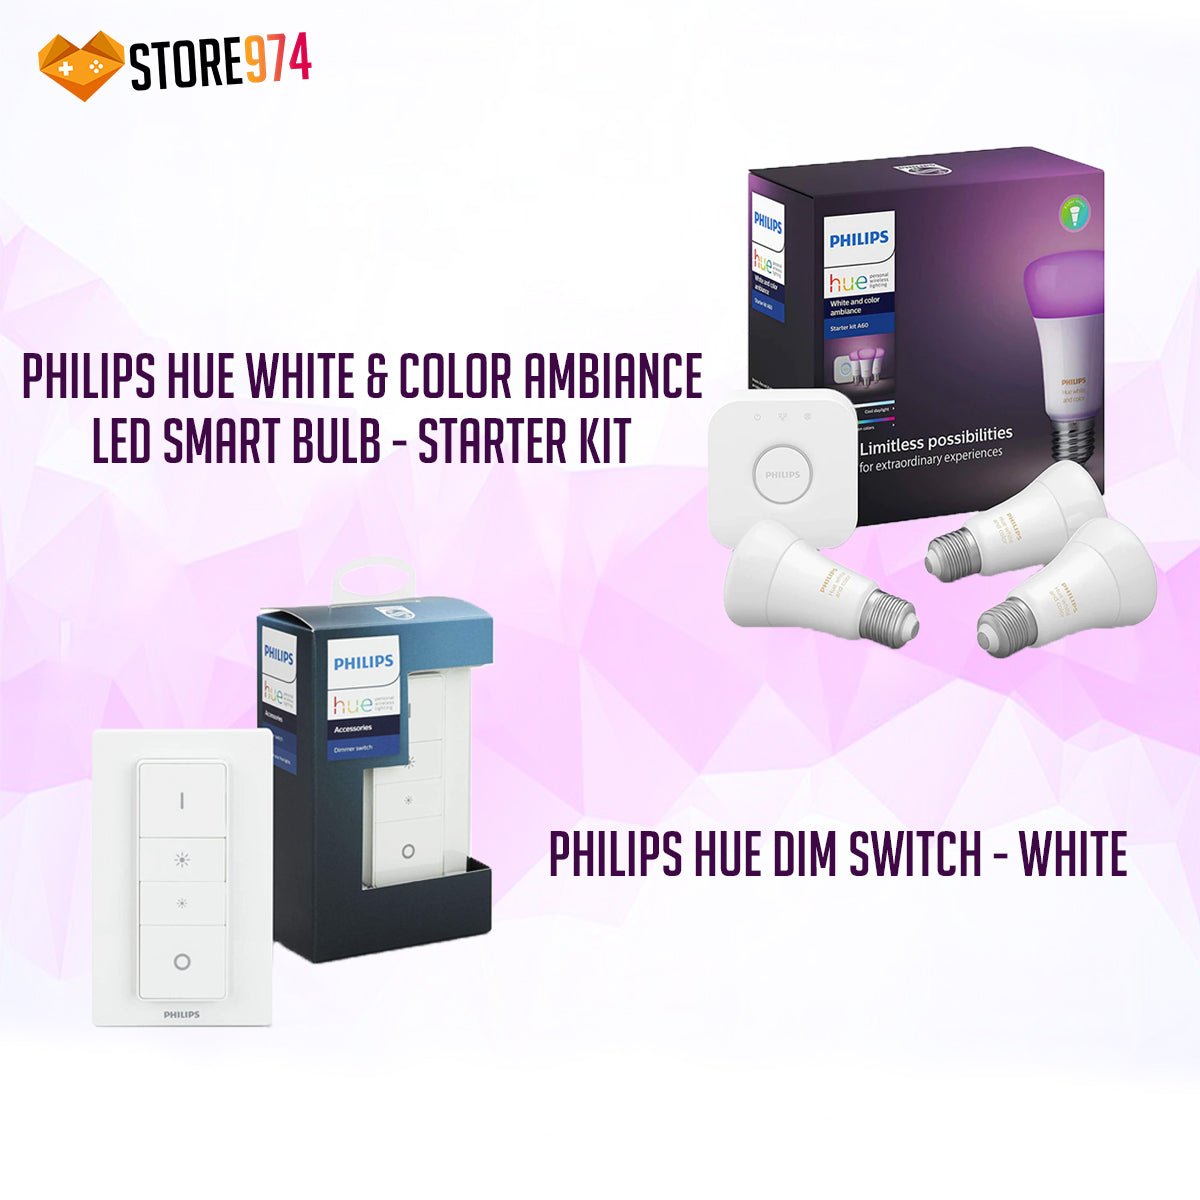 Philips HUE White & Color Ambiance LED Smart Bulb - Starter Kit + Philips HUE Dim Switch - Store 974 | ستور ٩٧٤